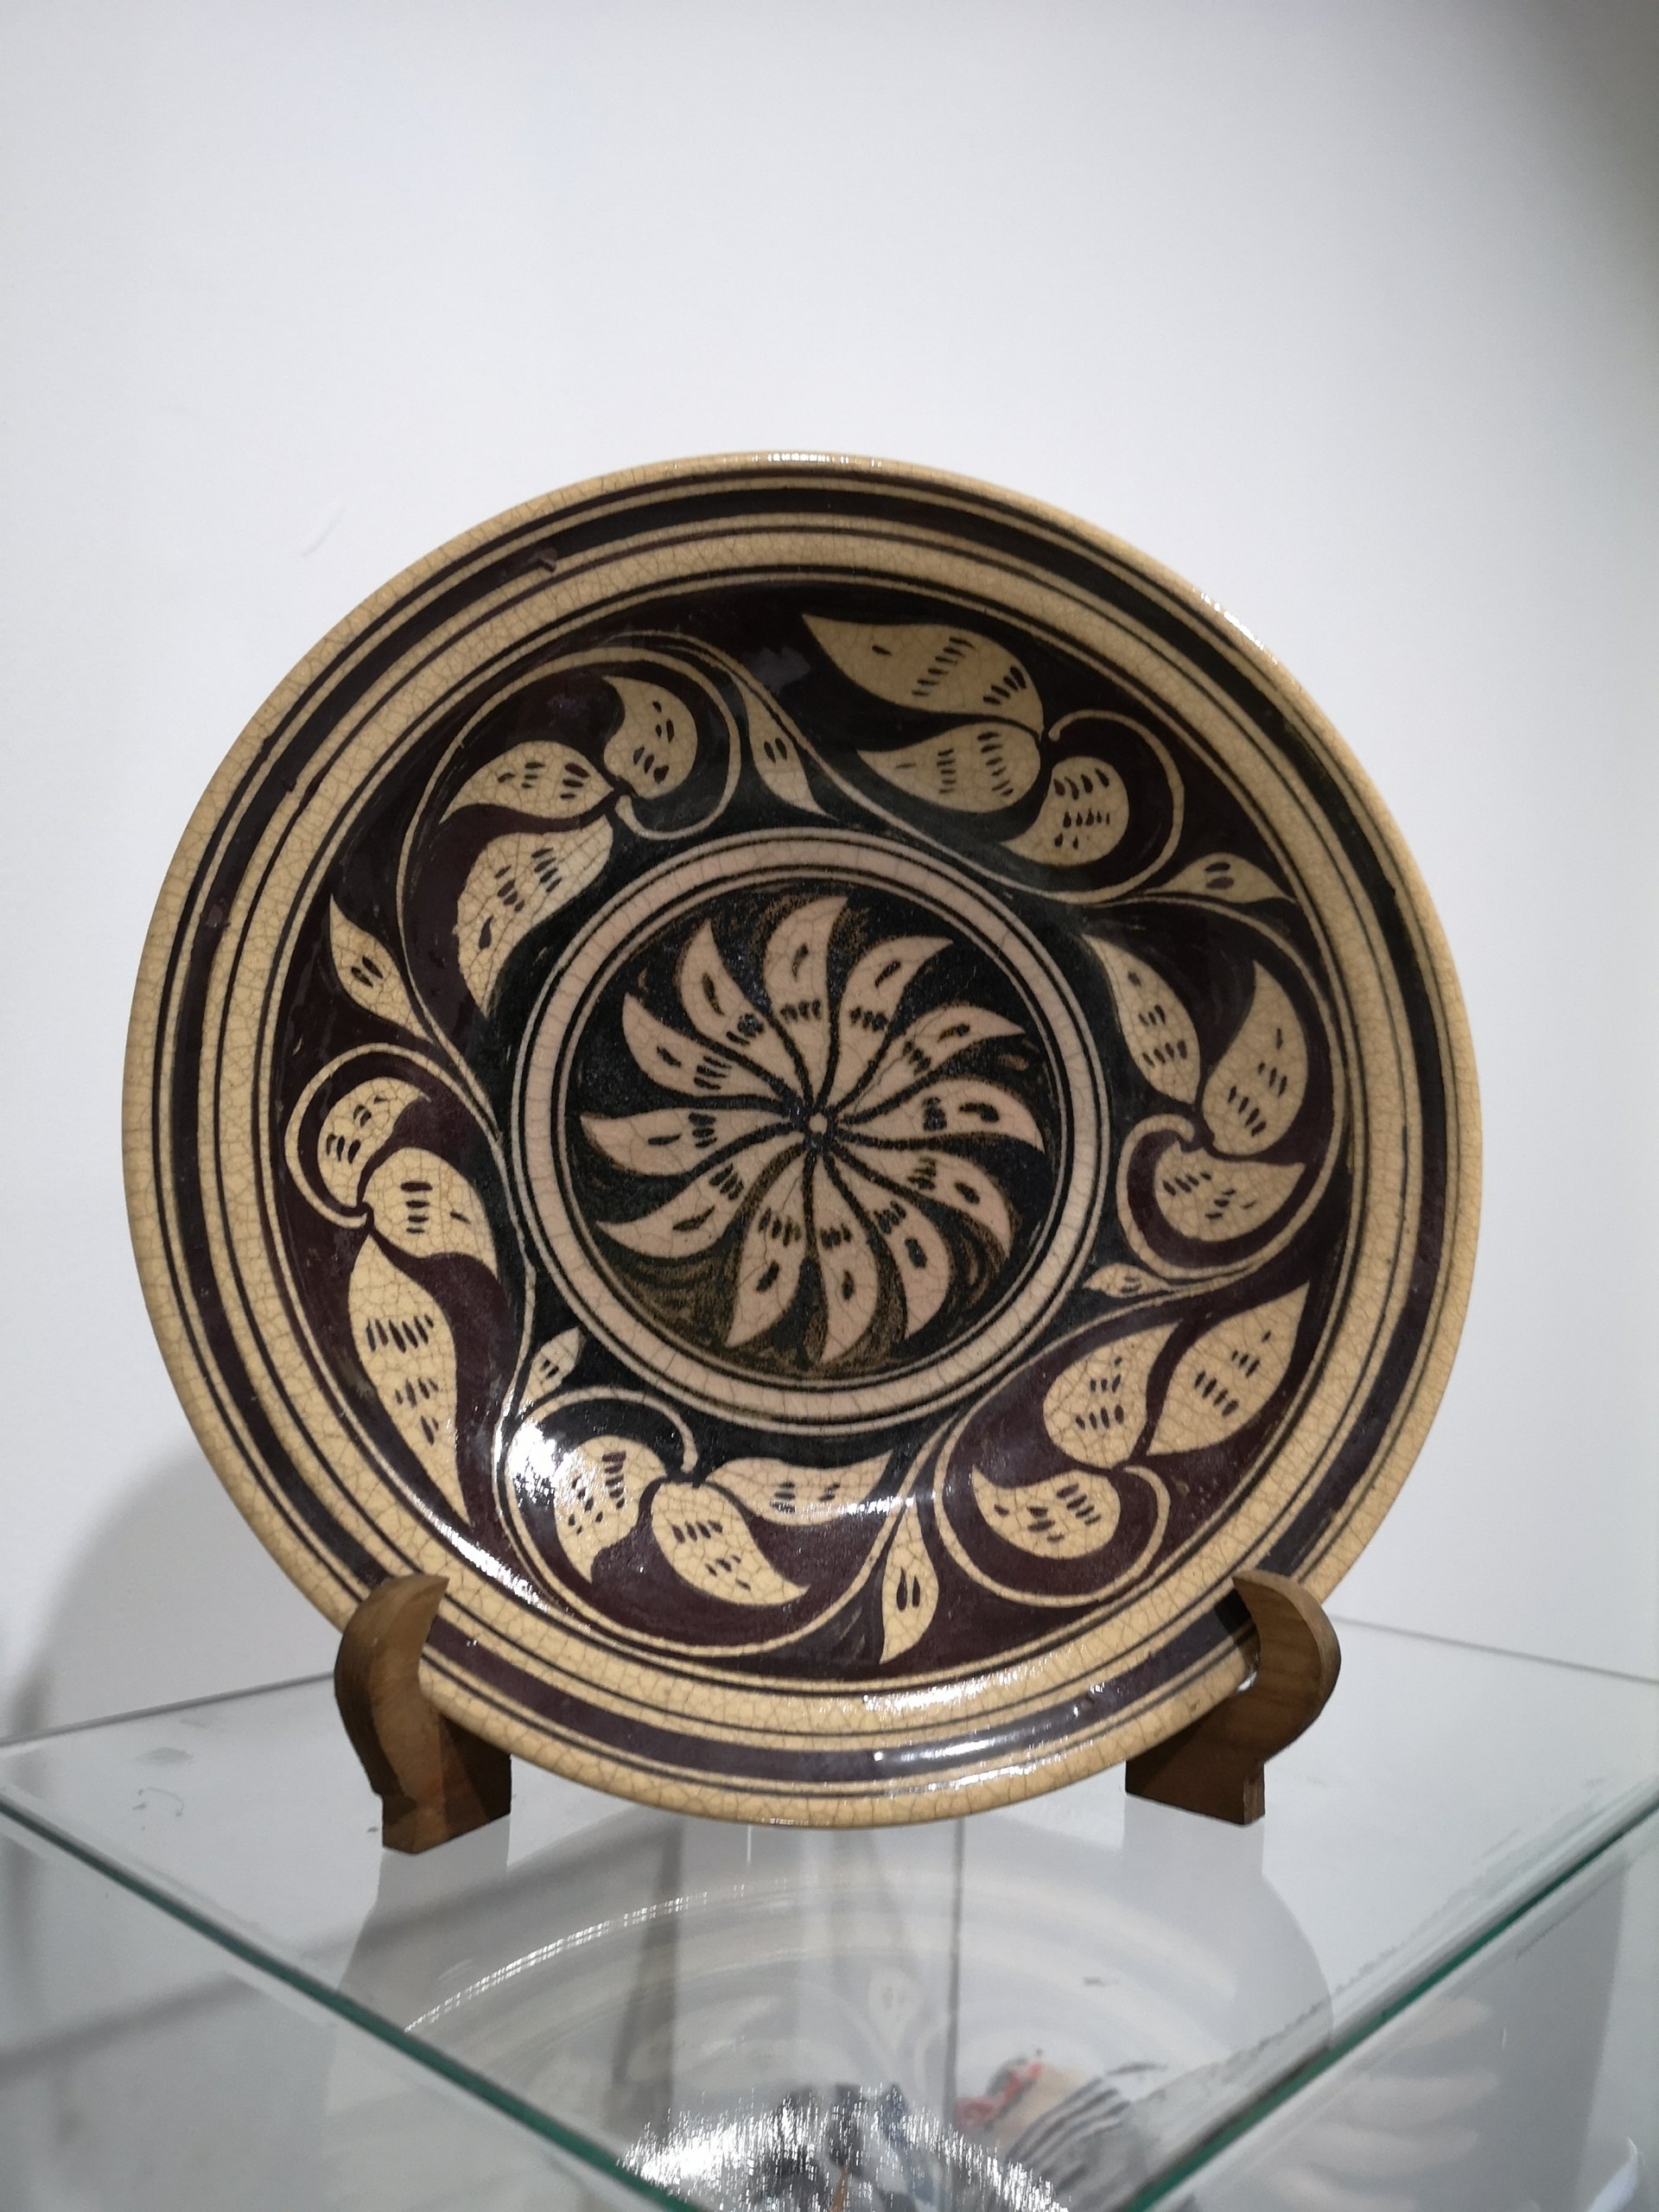 Ceramic Plate - Wiang Galong (Black Flower)